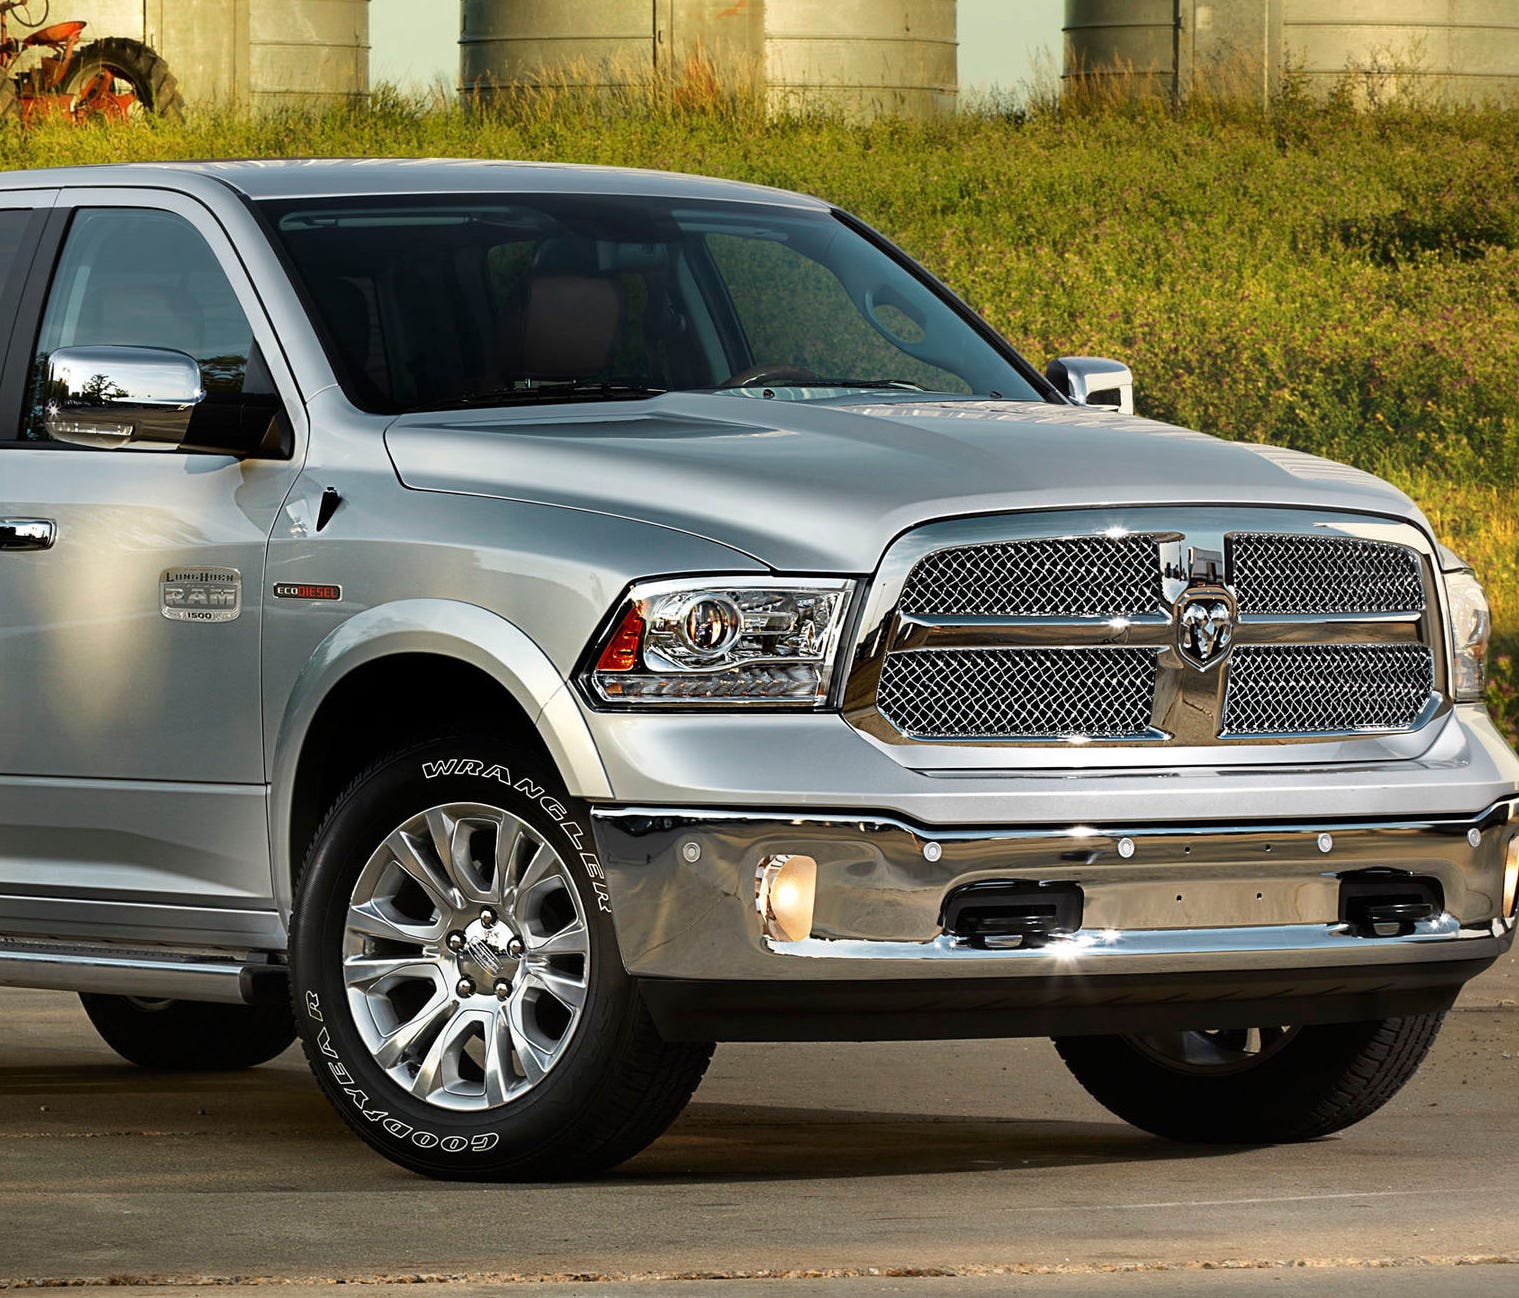 The Ram 1500 EcoDiesel has a hit for Fiat Chrysler